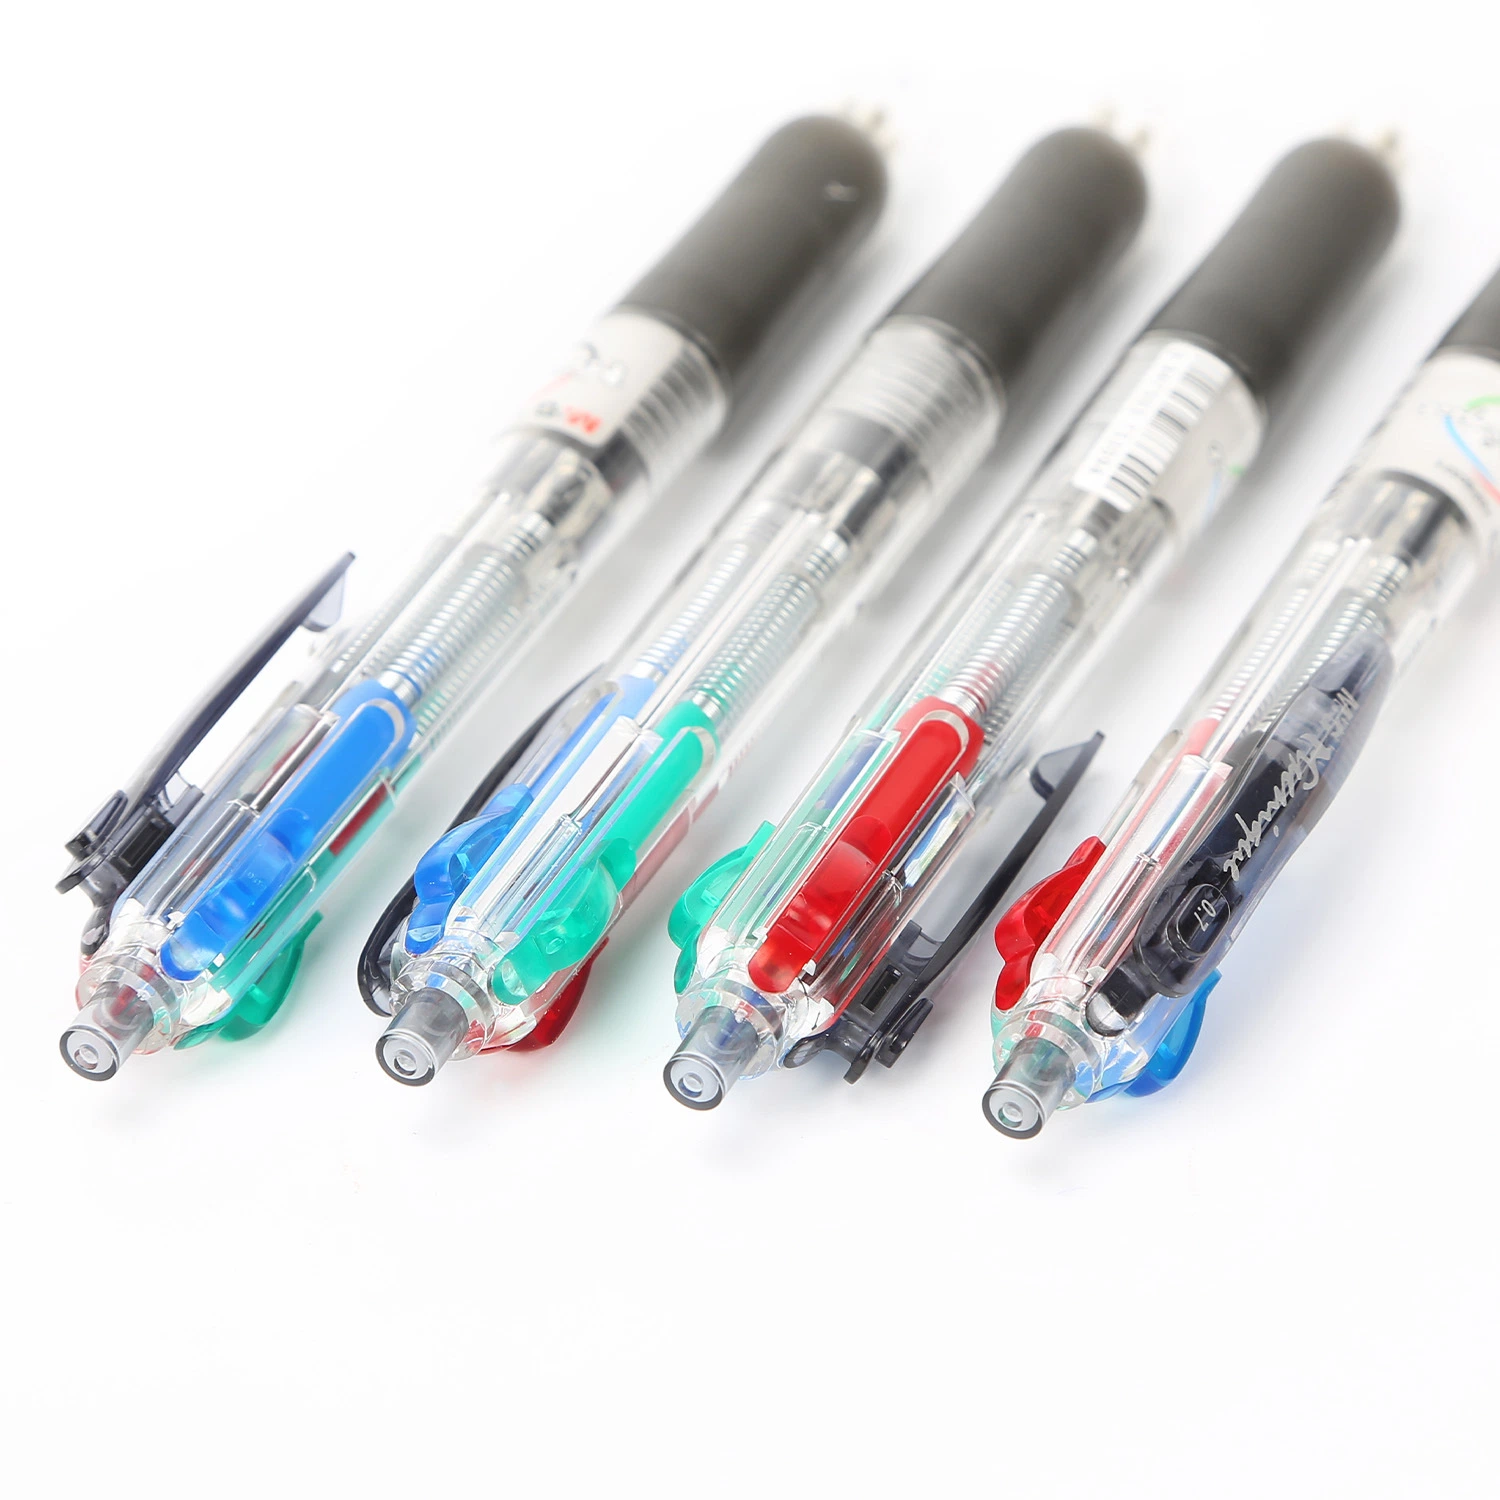 Hot New Design School and Office Supplies 4 in 1 Multi Coloured Ballpoint Pen for Promotion